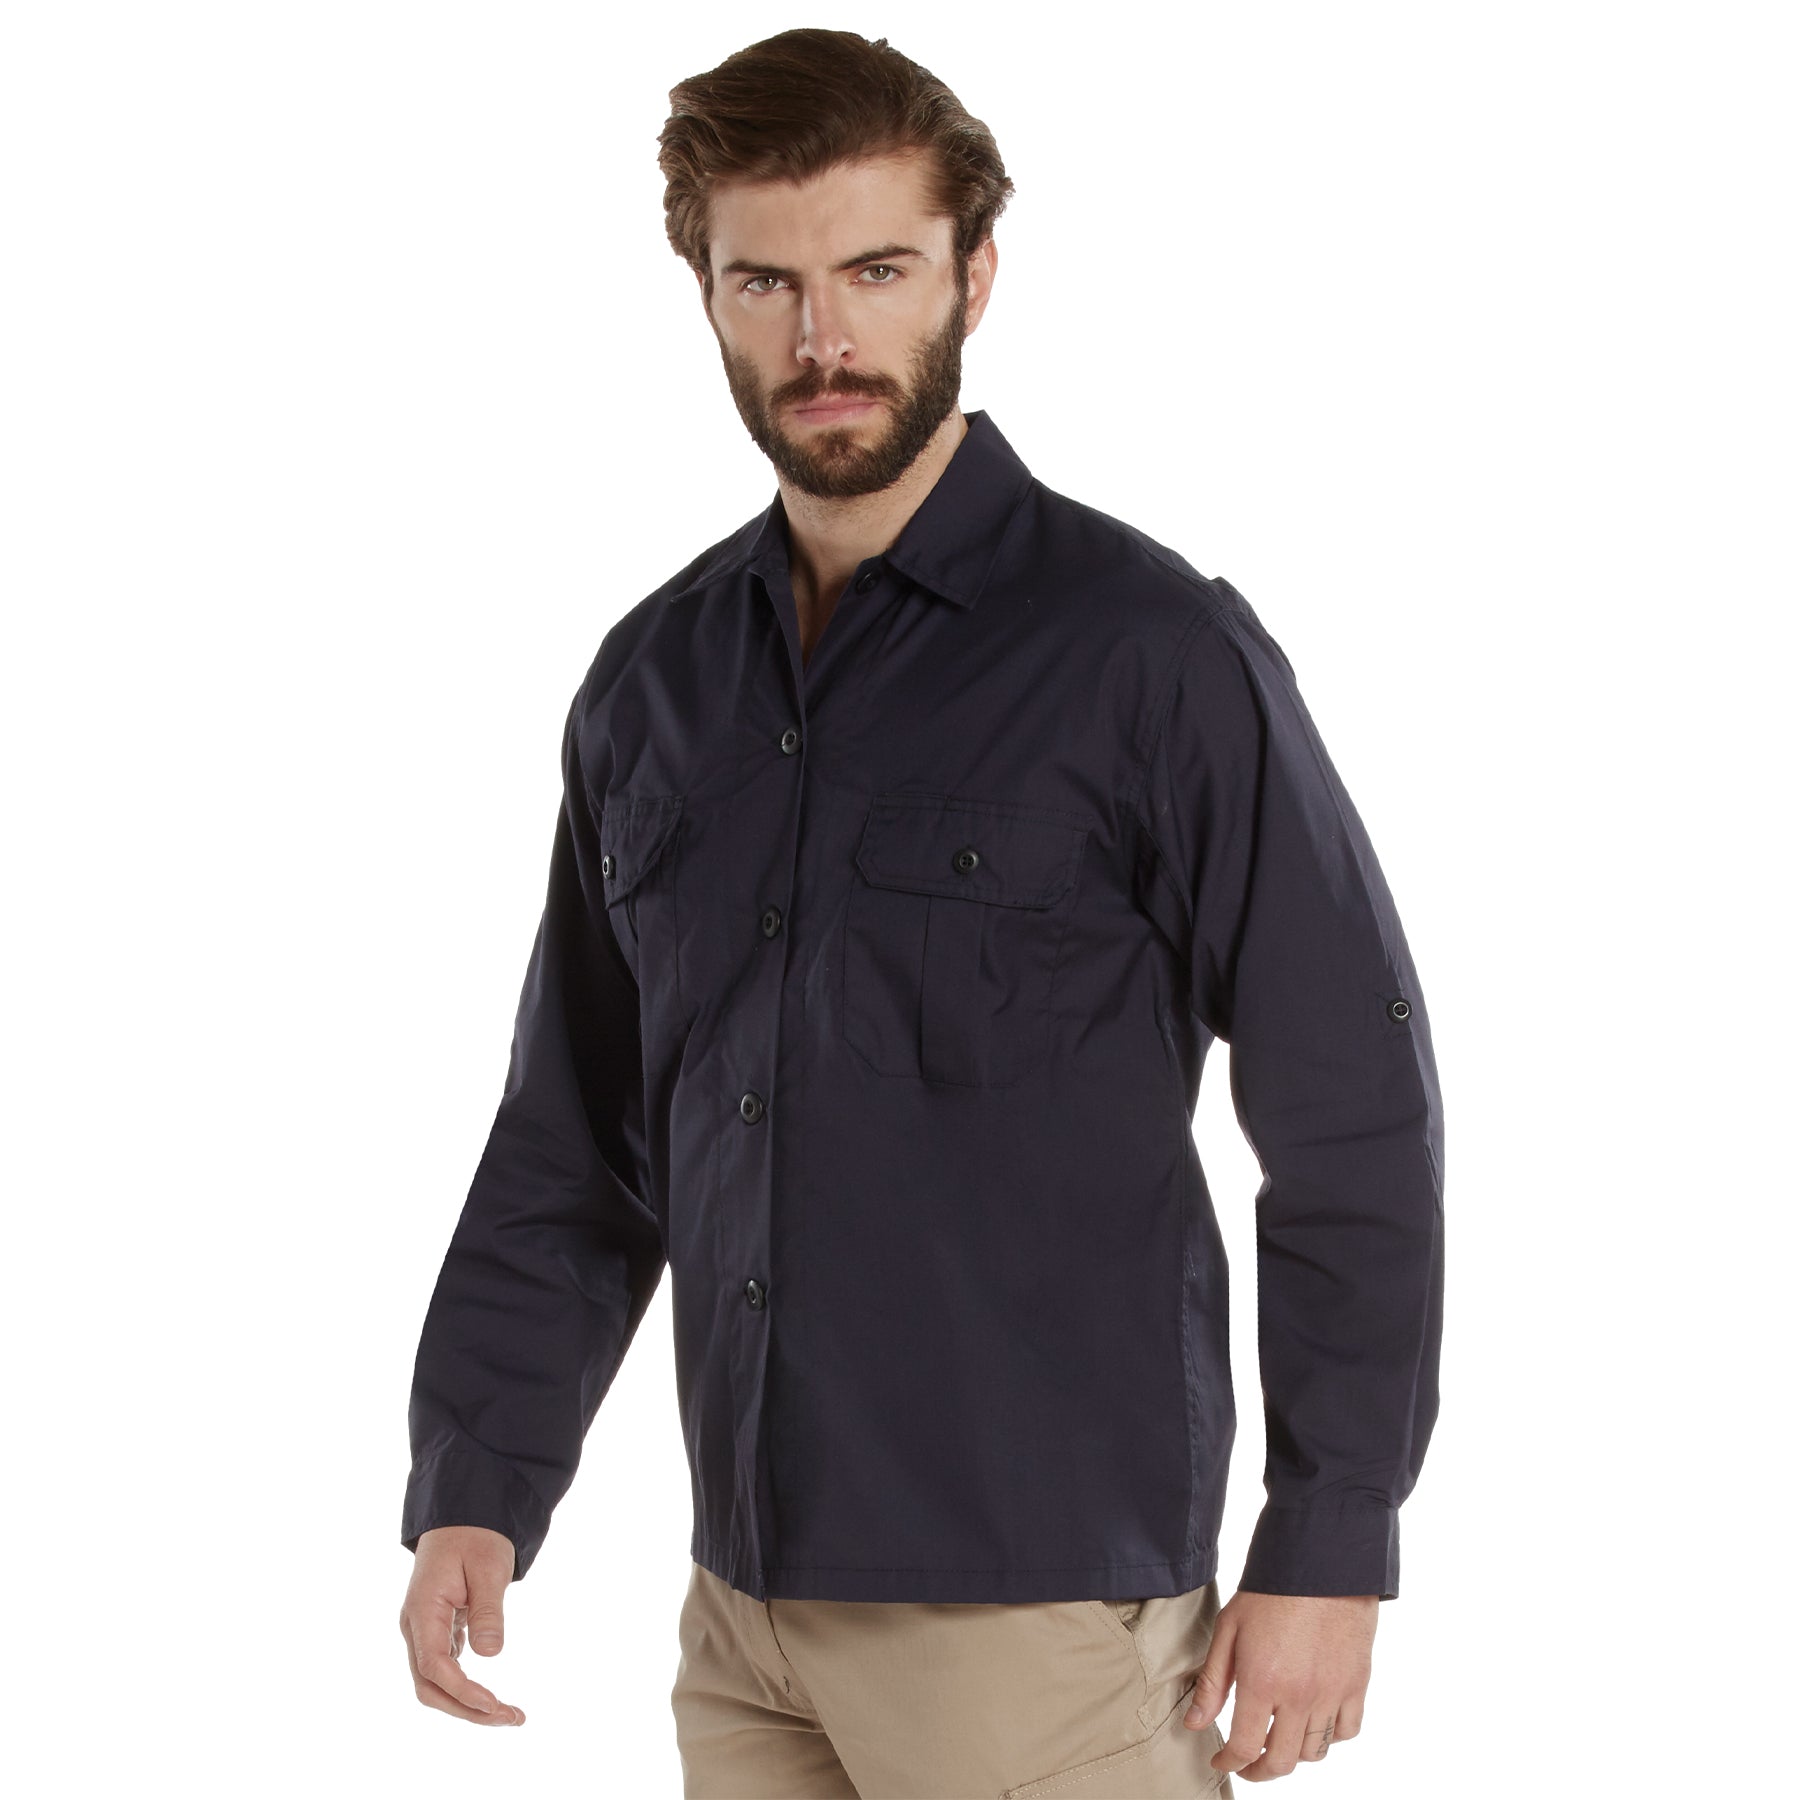 Lightweight Poly/Cotton Rip-Stop Tactical Shirts Midnight Navy Blue